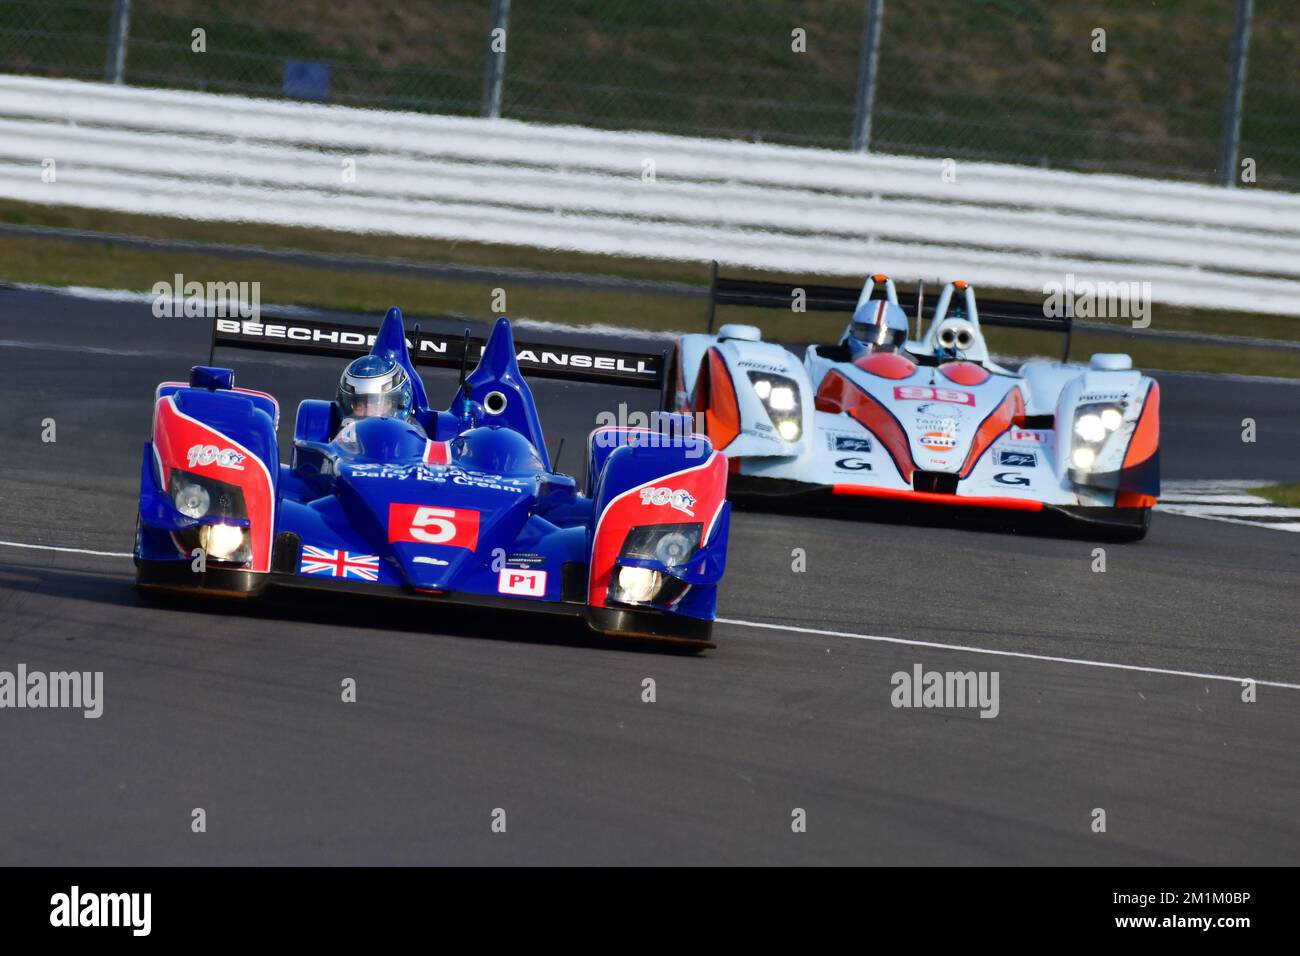 Keith Frieser, Zytek 09s, Jamie Constable, Pescarolo LMP1, Masters Endurance Legends, two races across the weekend on the full Grand Prix circuit, fea Stock Photo